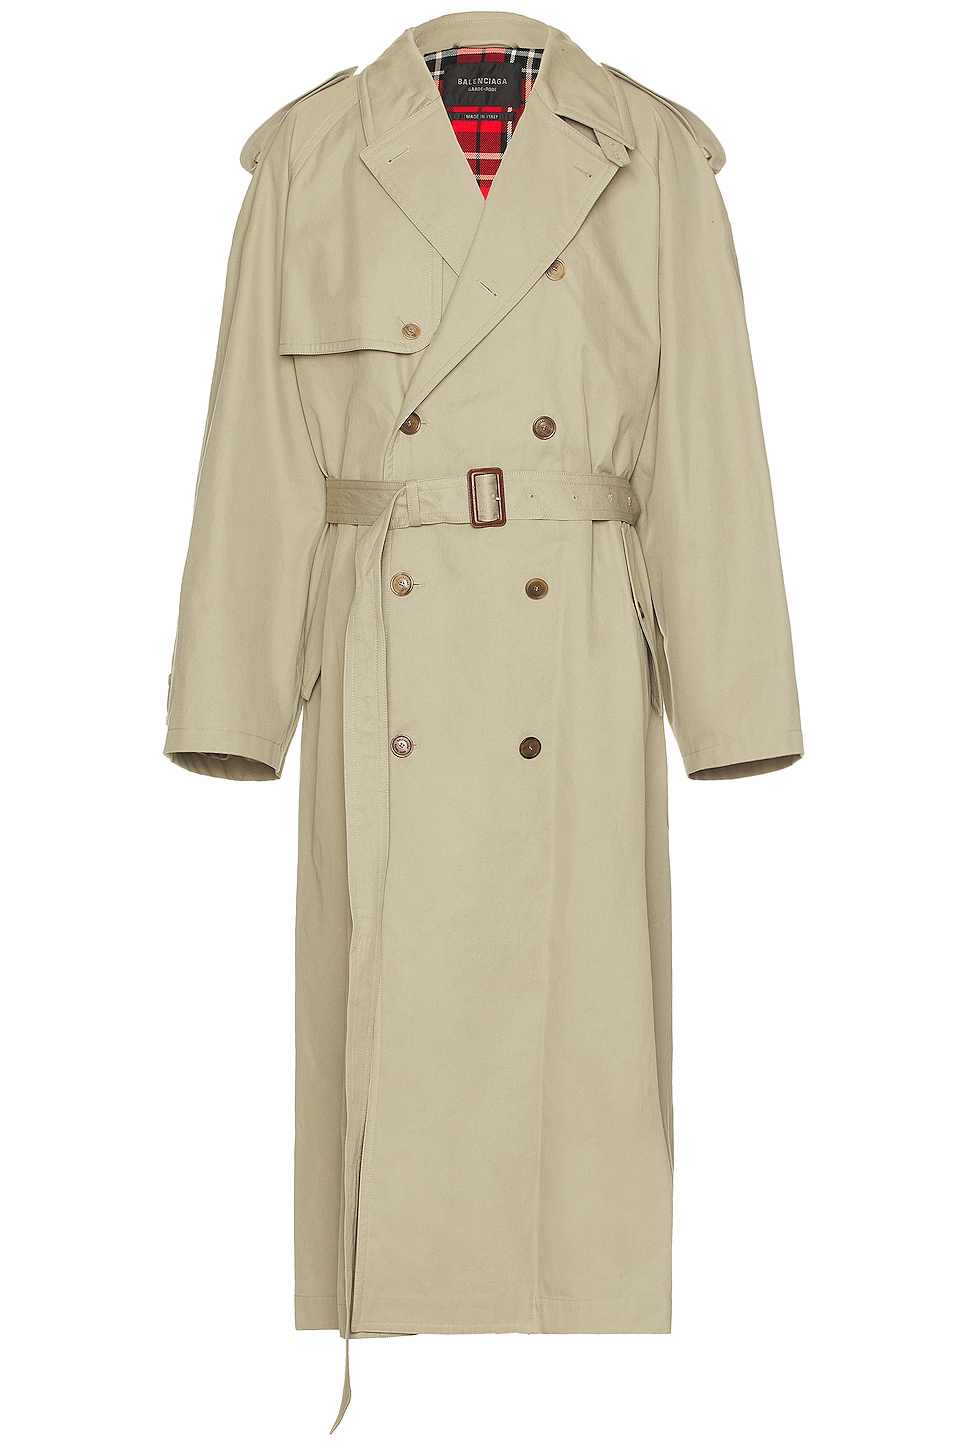 Image 1 of Balenciaga Trench Coat in Military Beige